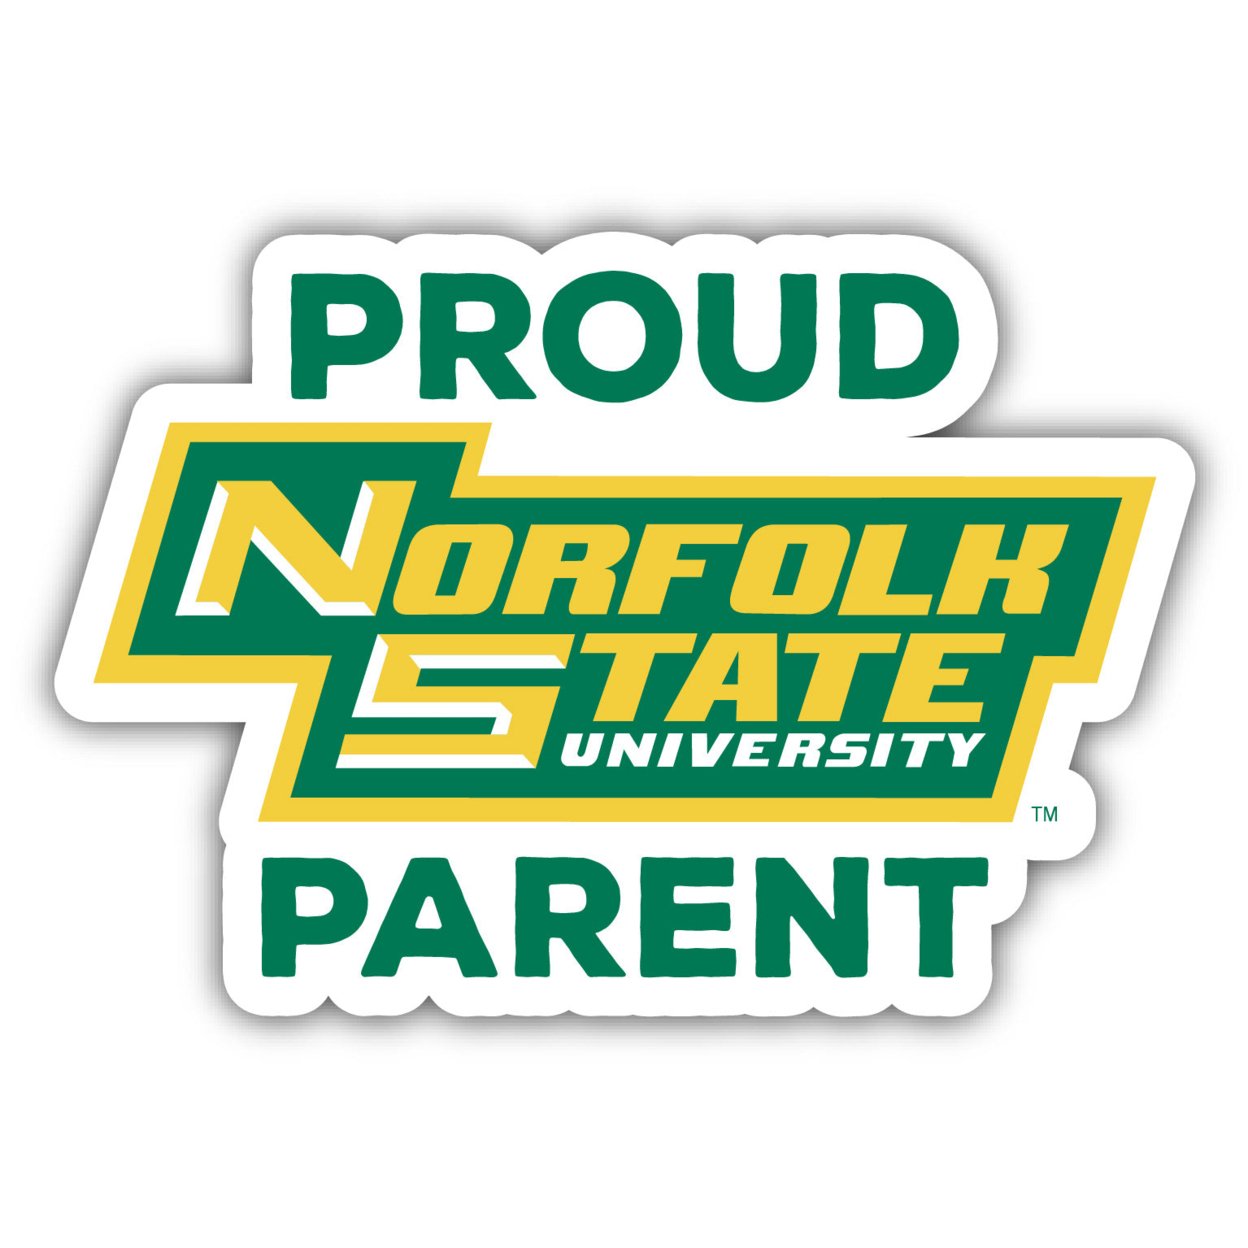 Norfolk State University 4 Proud Parent Decal 4 Pack